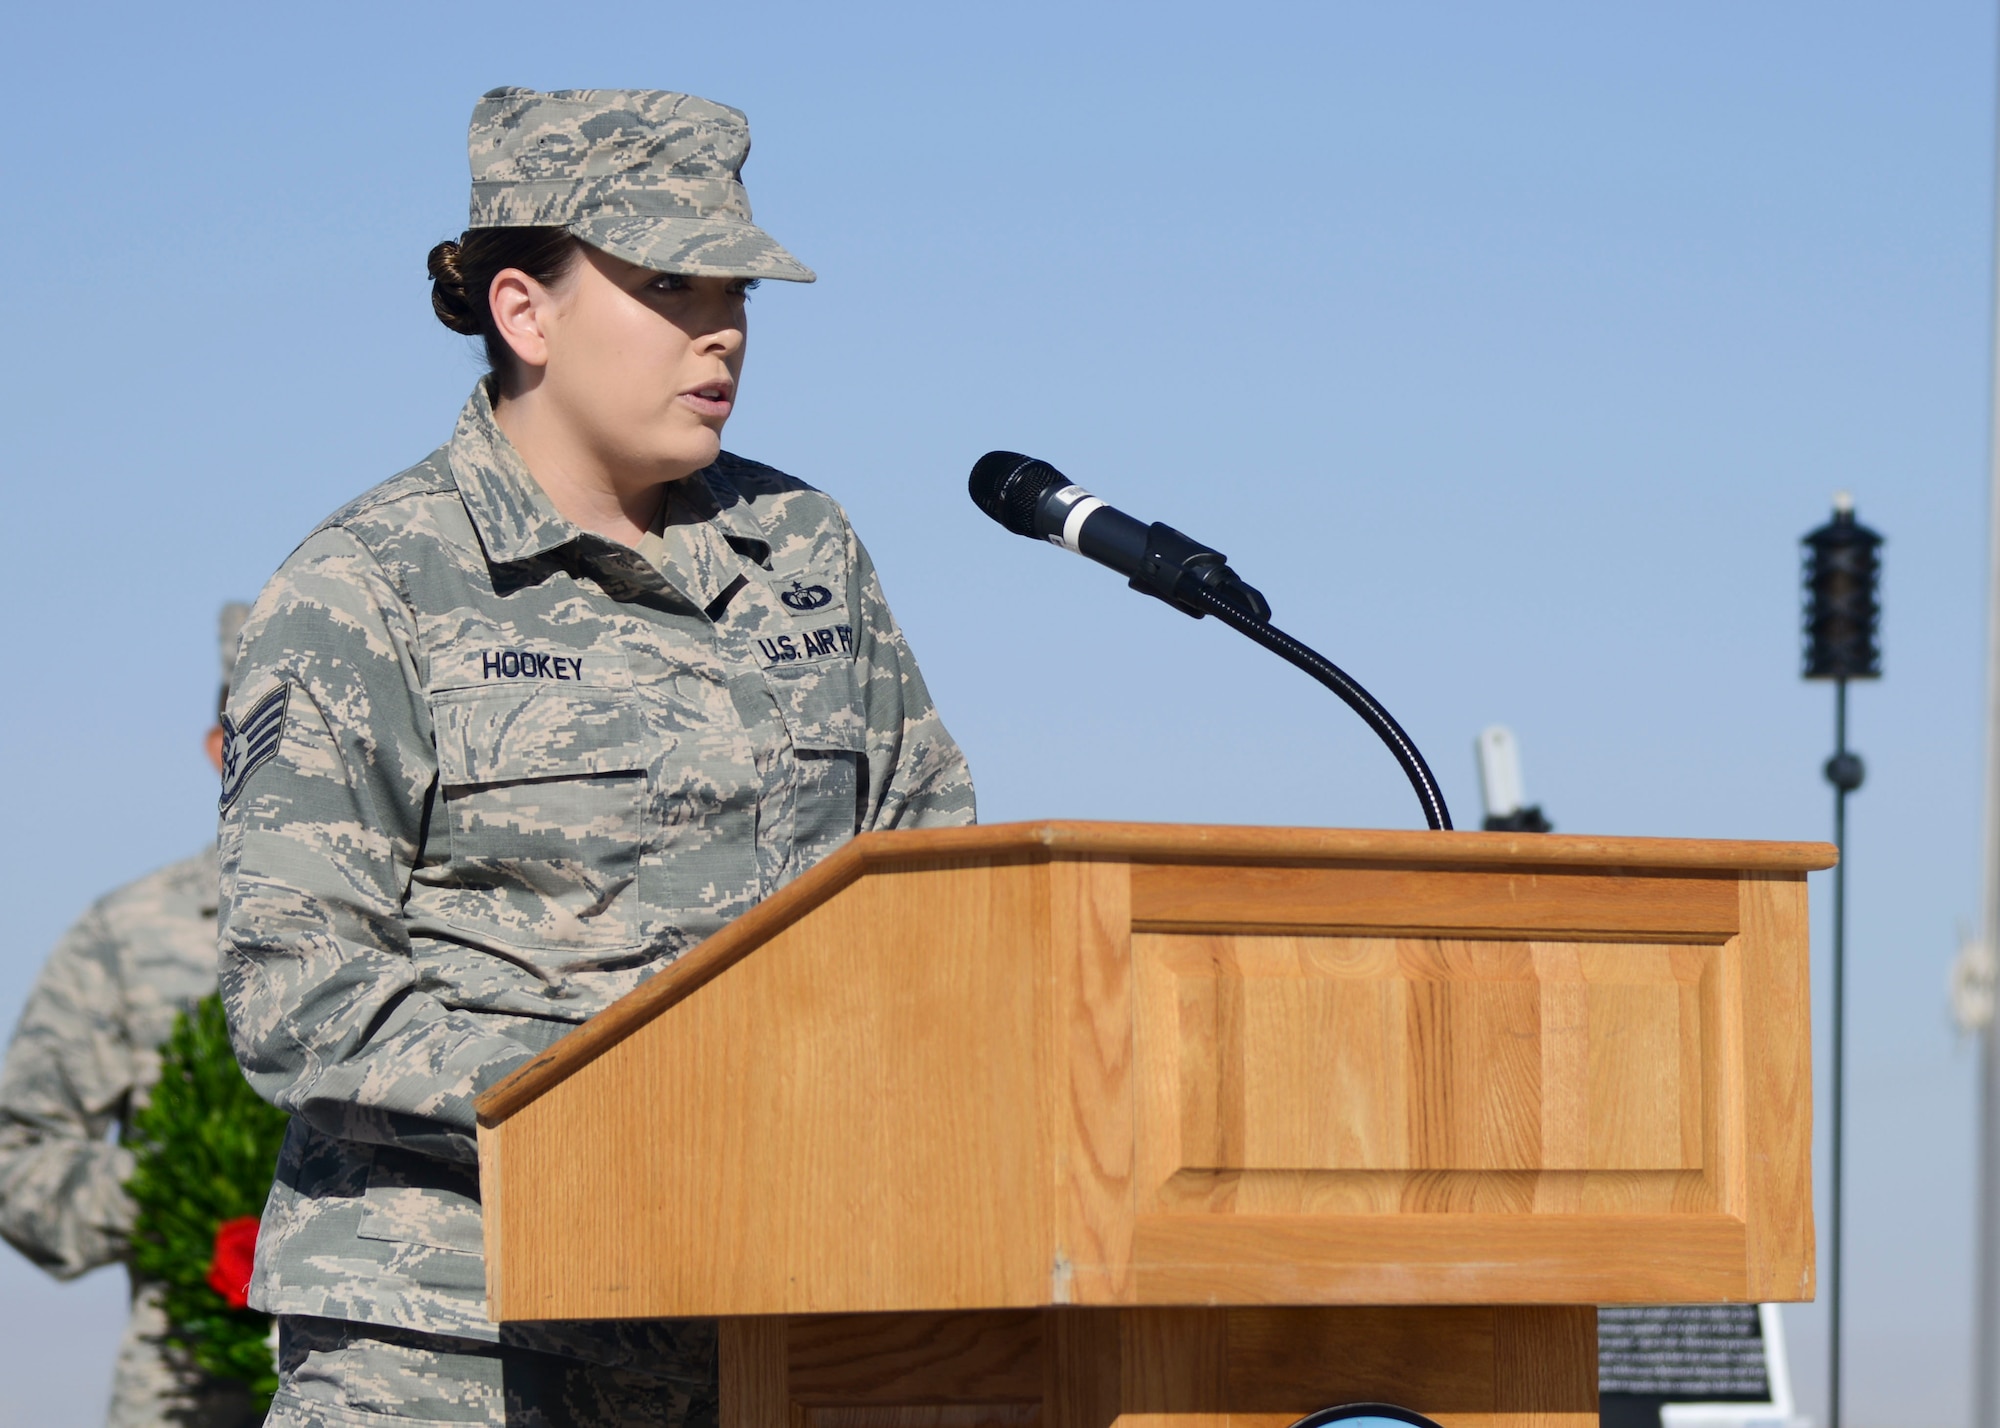 Staff Sgt. Ashley Hookey, 412th Operations Suport Squadron, recounts the story of the sinking of the Japanese “Hell Ship” Junyo Maru at a wreath-laying ceremony commemorating National POW/MIA Recognition Day at the Airman Leadership School Drill Pad at Edwards Air Force Base, California, Sept. 21. The unmarked Junyo Maru was transporting prisoners of war when it was sunk of the coast of Sumatra on Sept. 18, 1944. Hookey’s great-grandfather was one of those killed during the sinking. (U.S. Air Force photo by Giancarlo Casem)